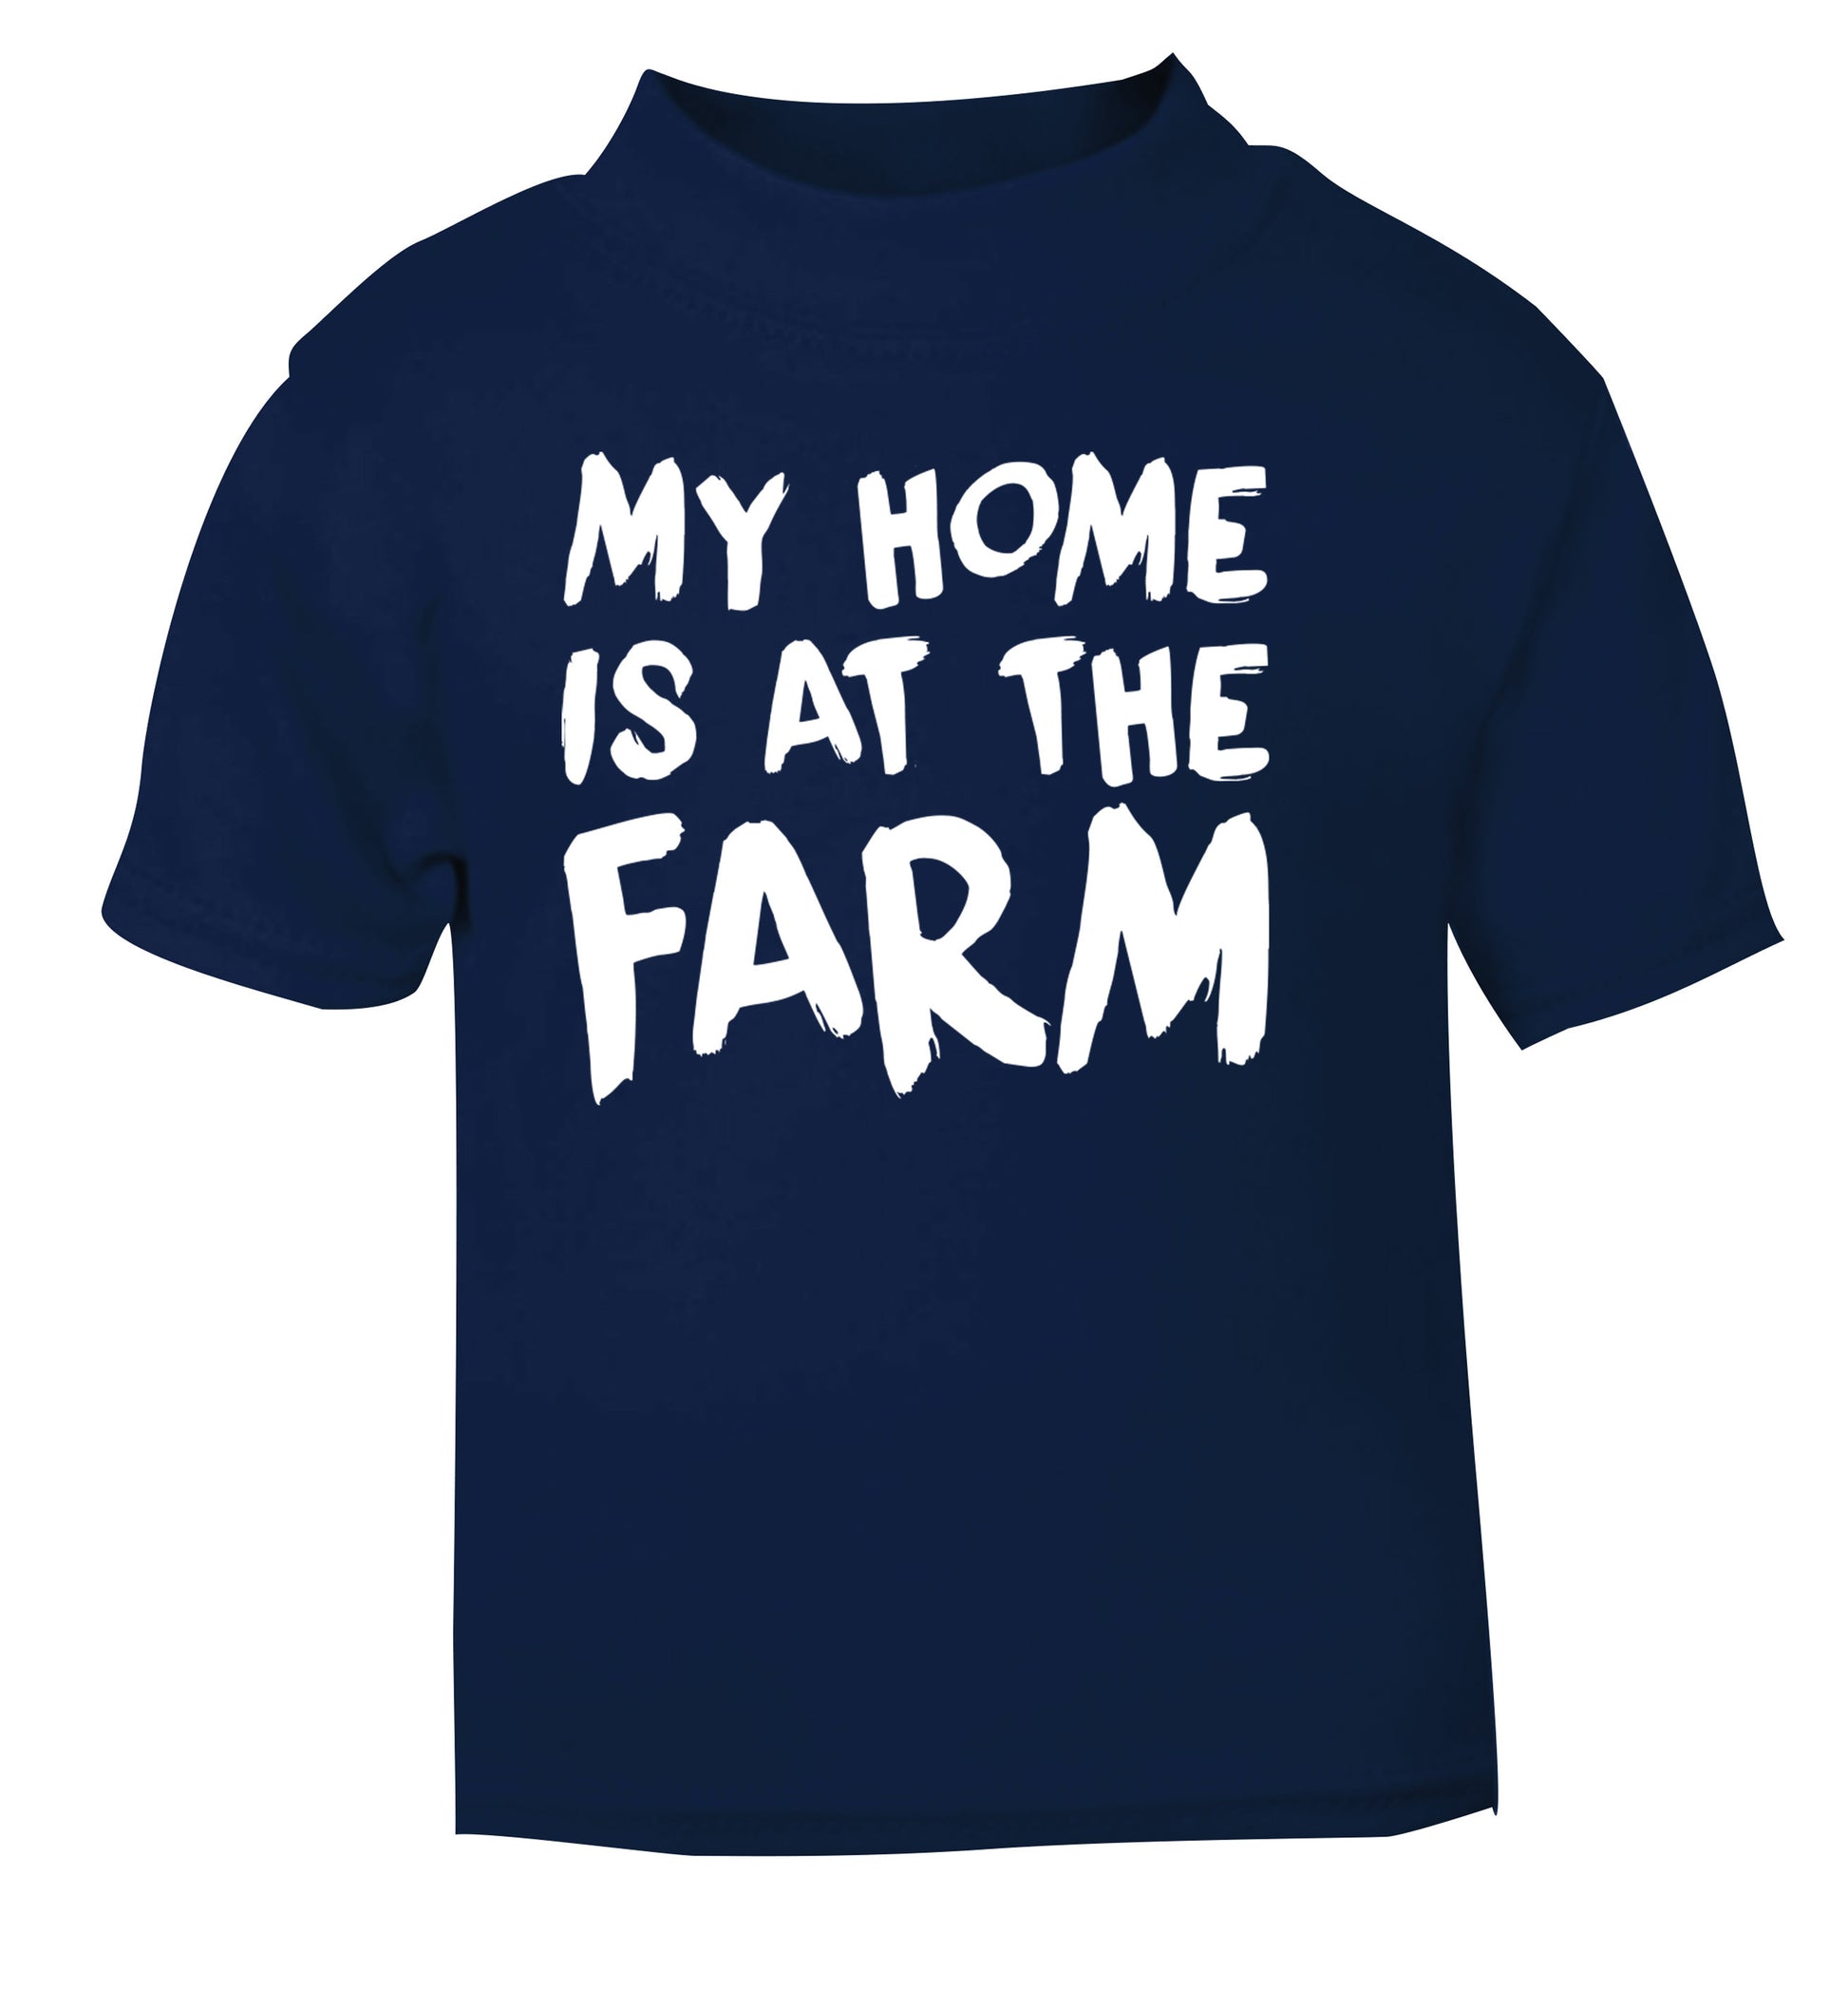 My home is at the farm navy Baby Toddler Tshirt 2 Years